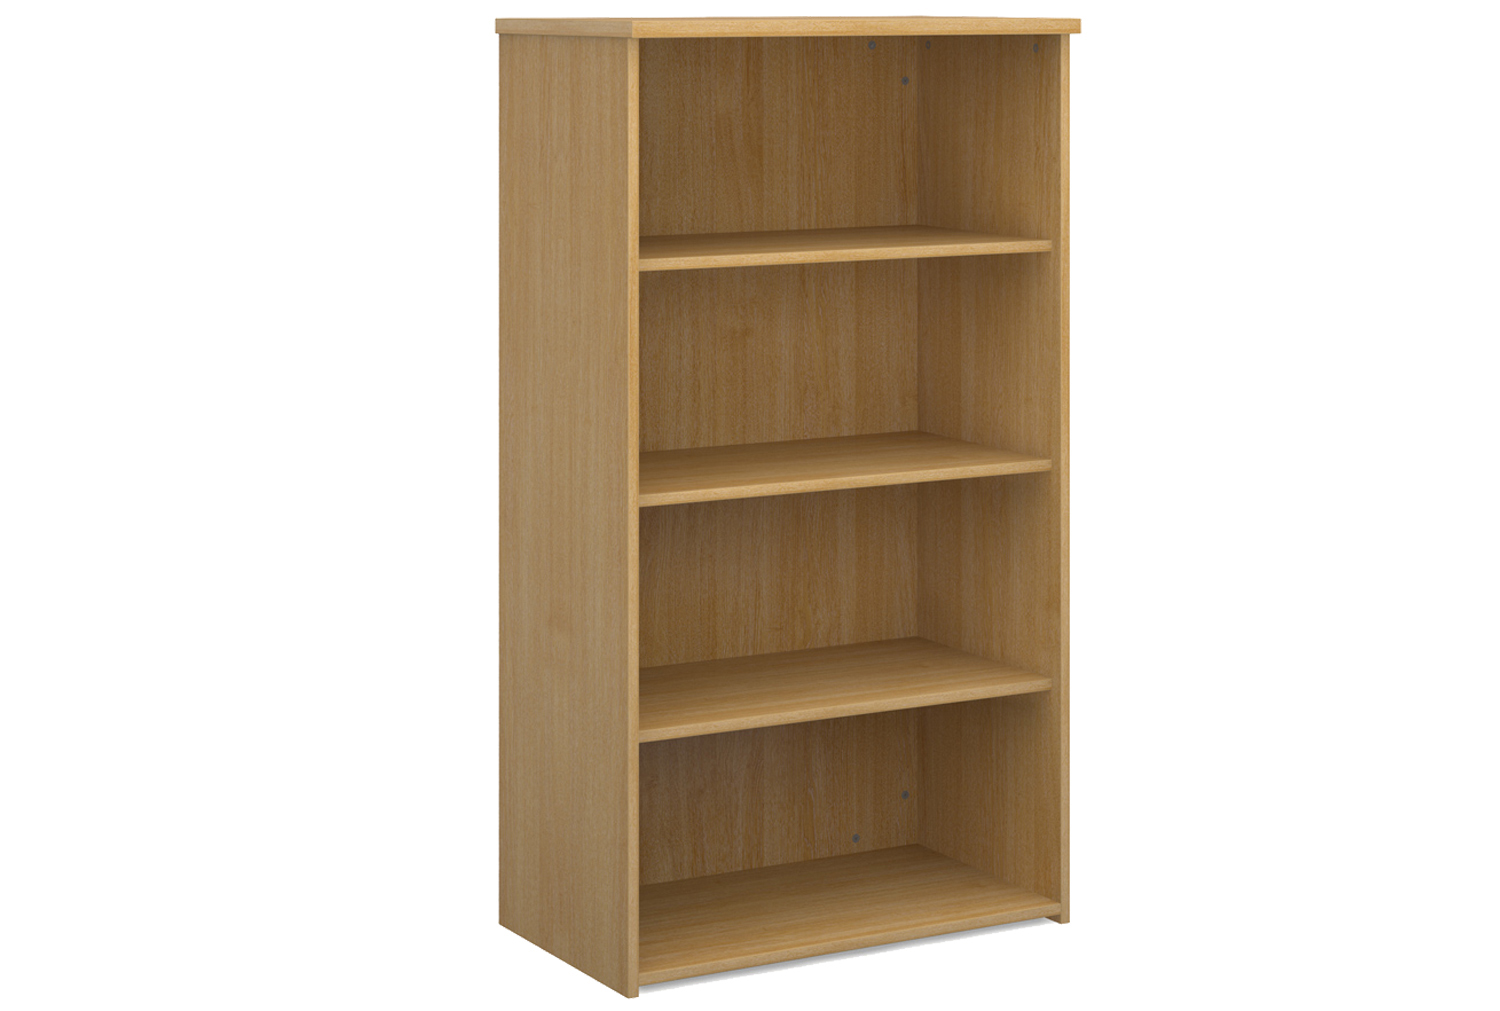 All Oak Office Bookcases, 3 Shelf - 80wx47dx144h (cm), Express Delivery